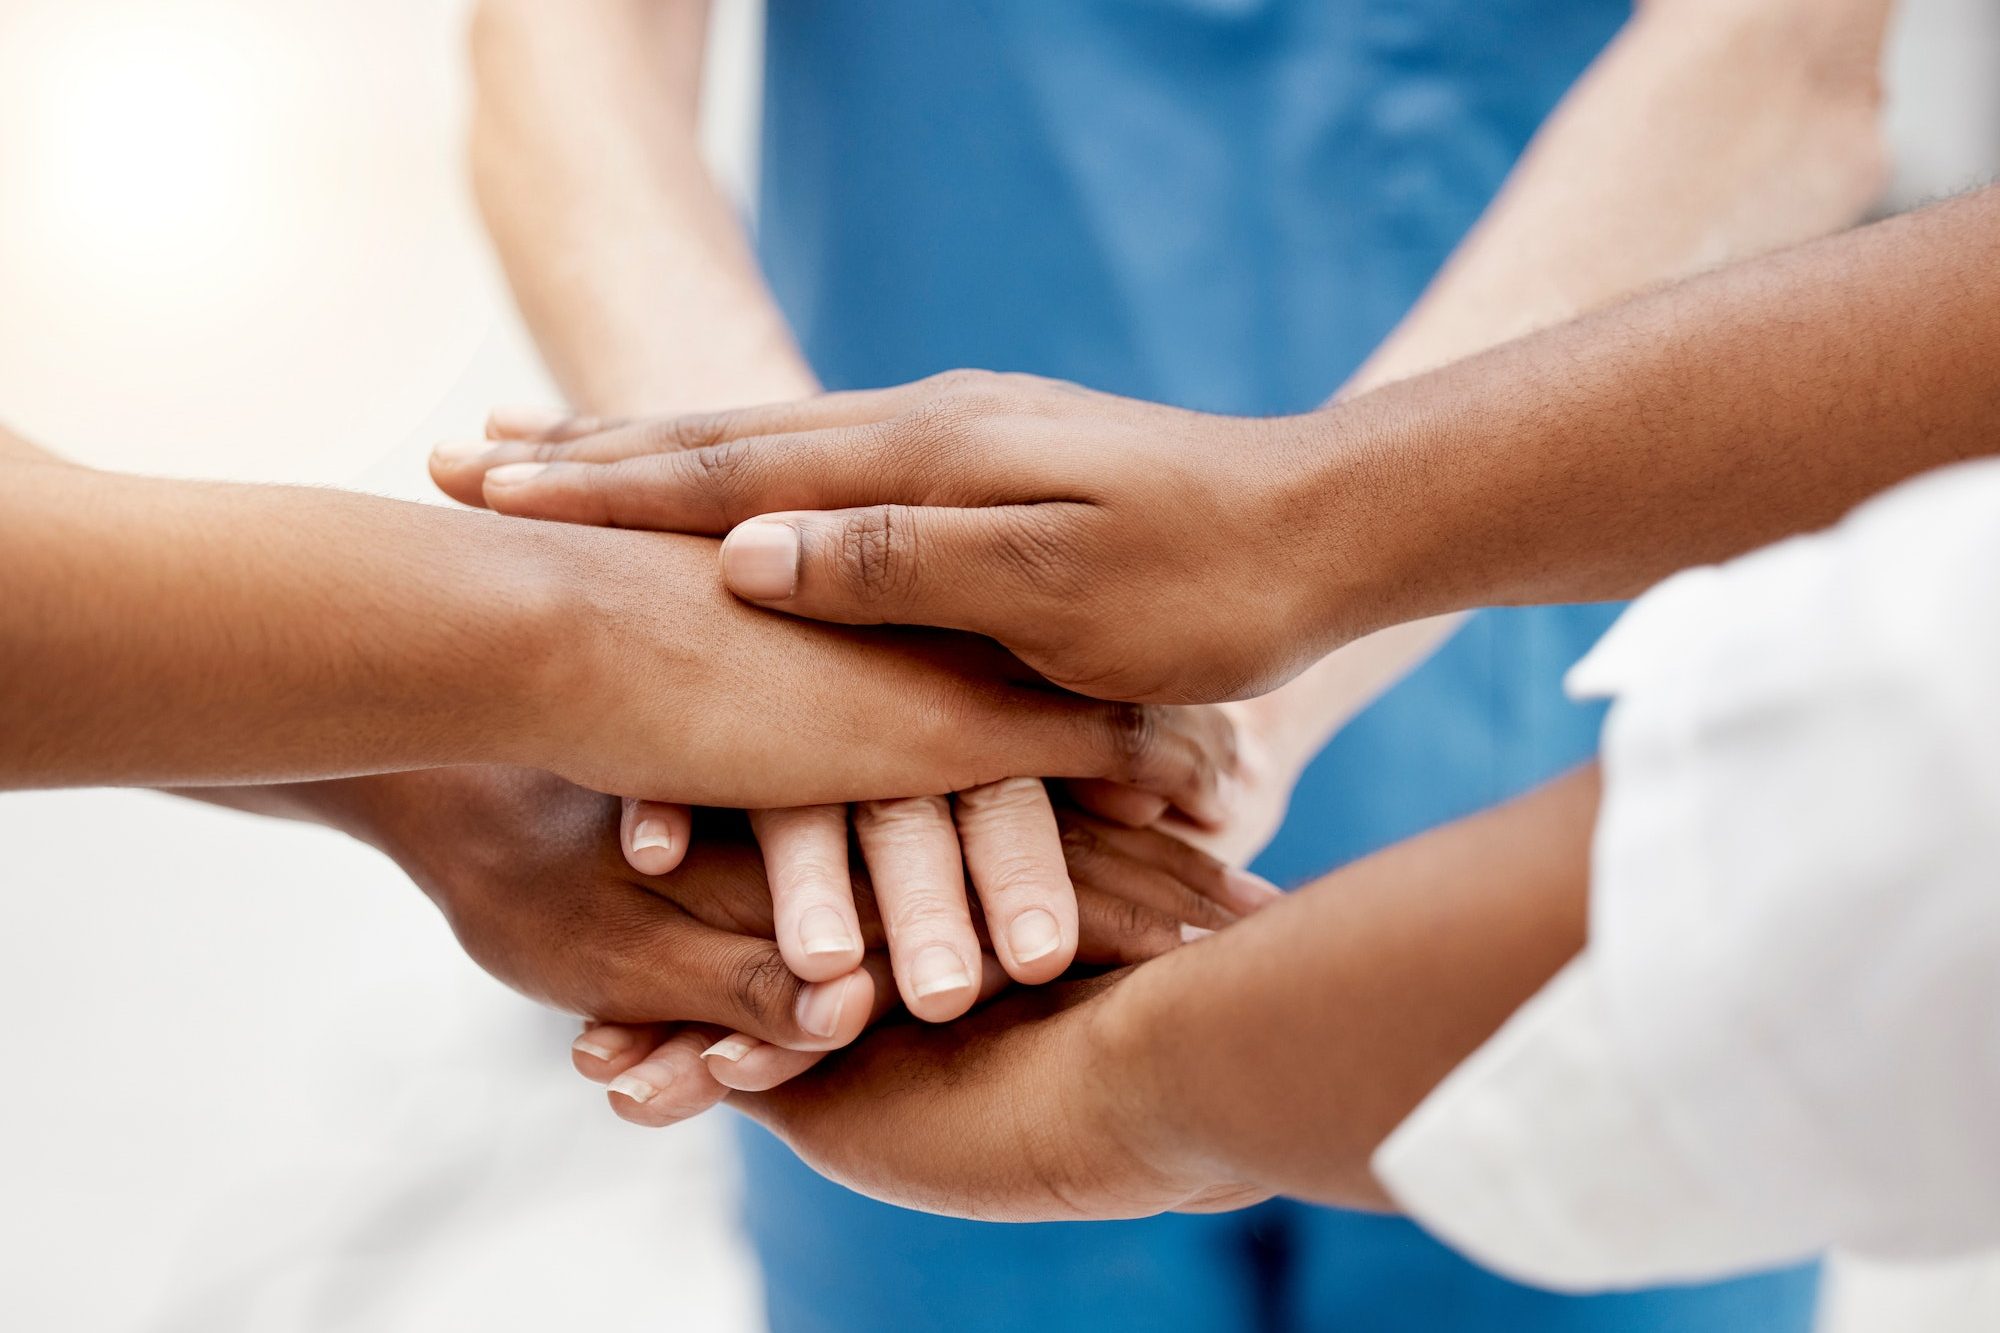 Hands, team and doctors, health collaboration with diversity in healthcare and teamwork for partner